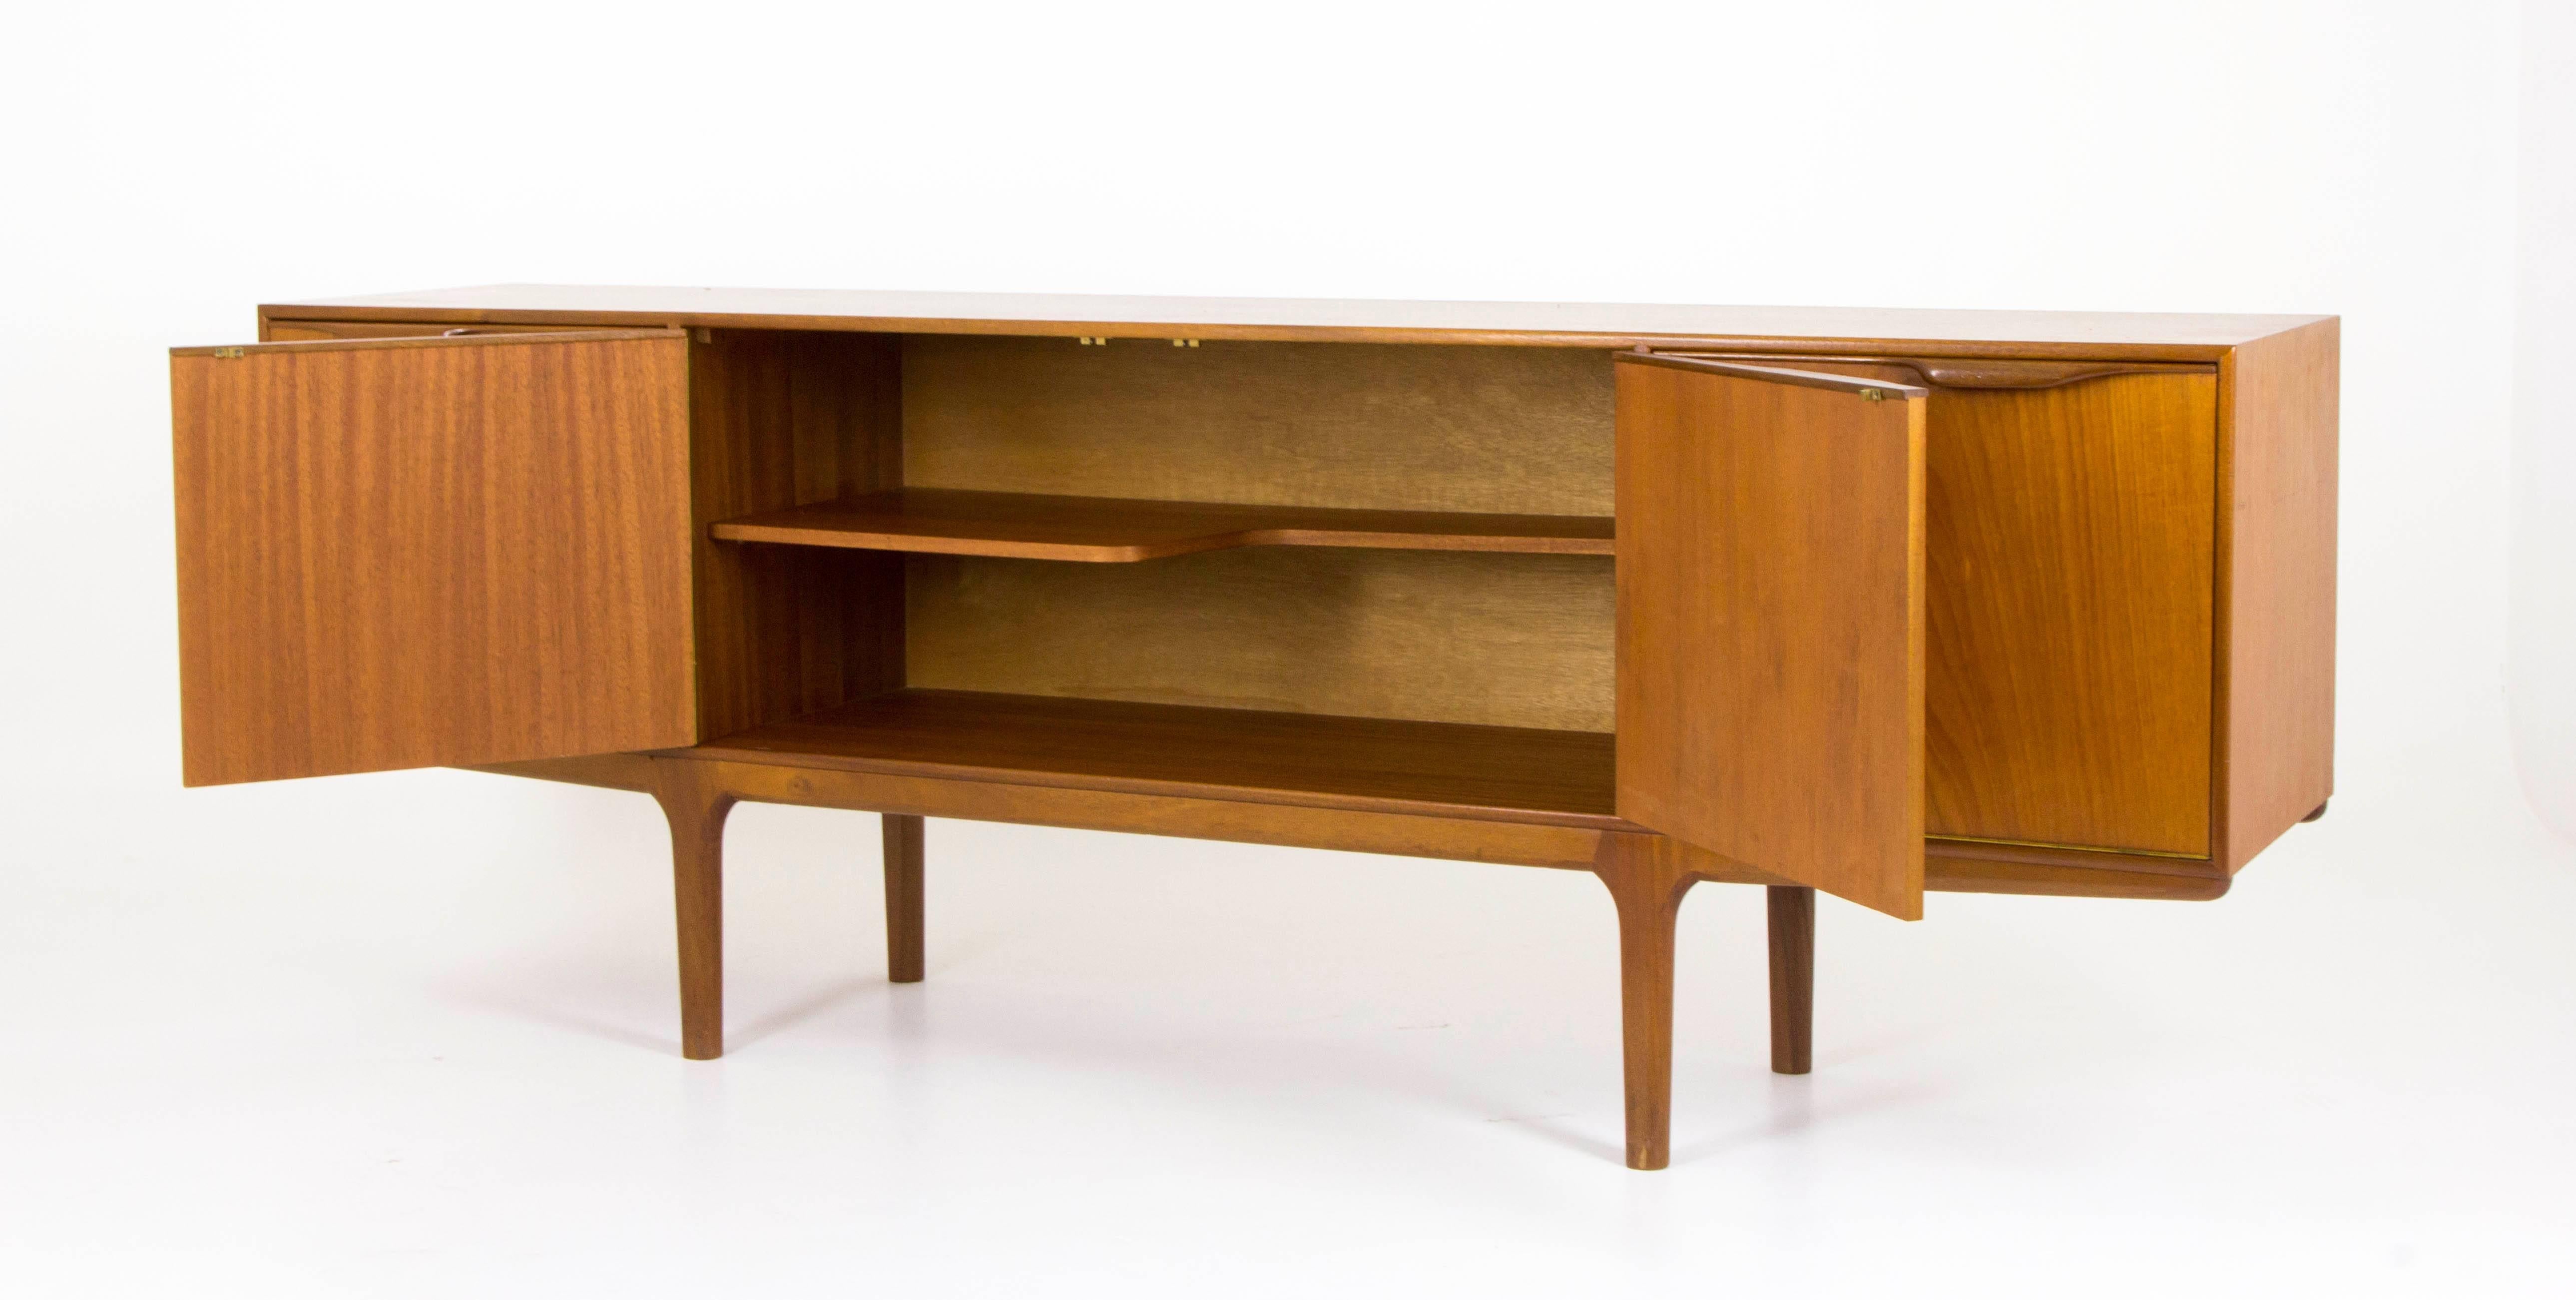 Scotland, 1960s
All original and excellent condition
Low sleek lines
Three drawers on left side
Behind two centre door a fixed symmetrical shelf
Right door folds down to reveal storage and slide out tray.

$2950

B573
Measures: 80.5"